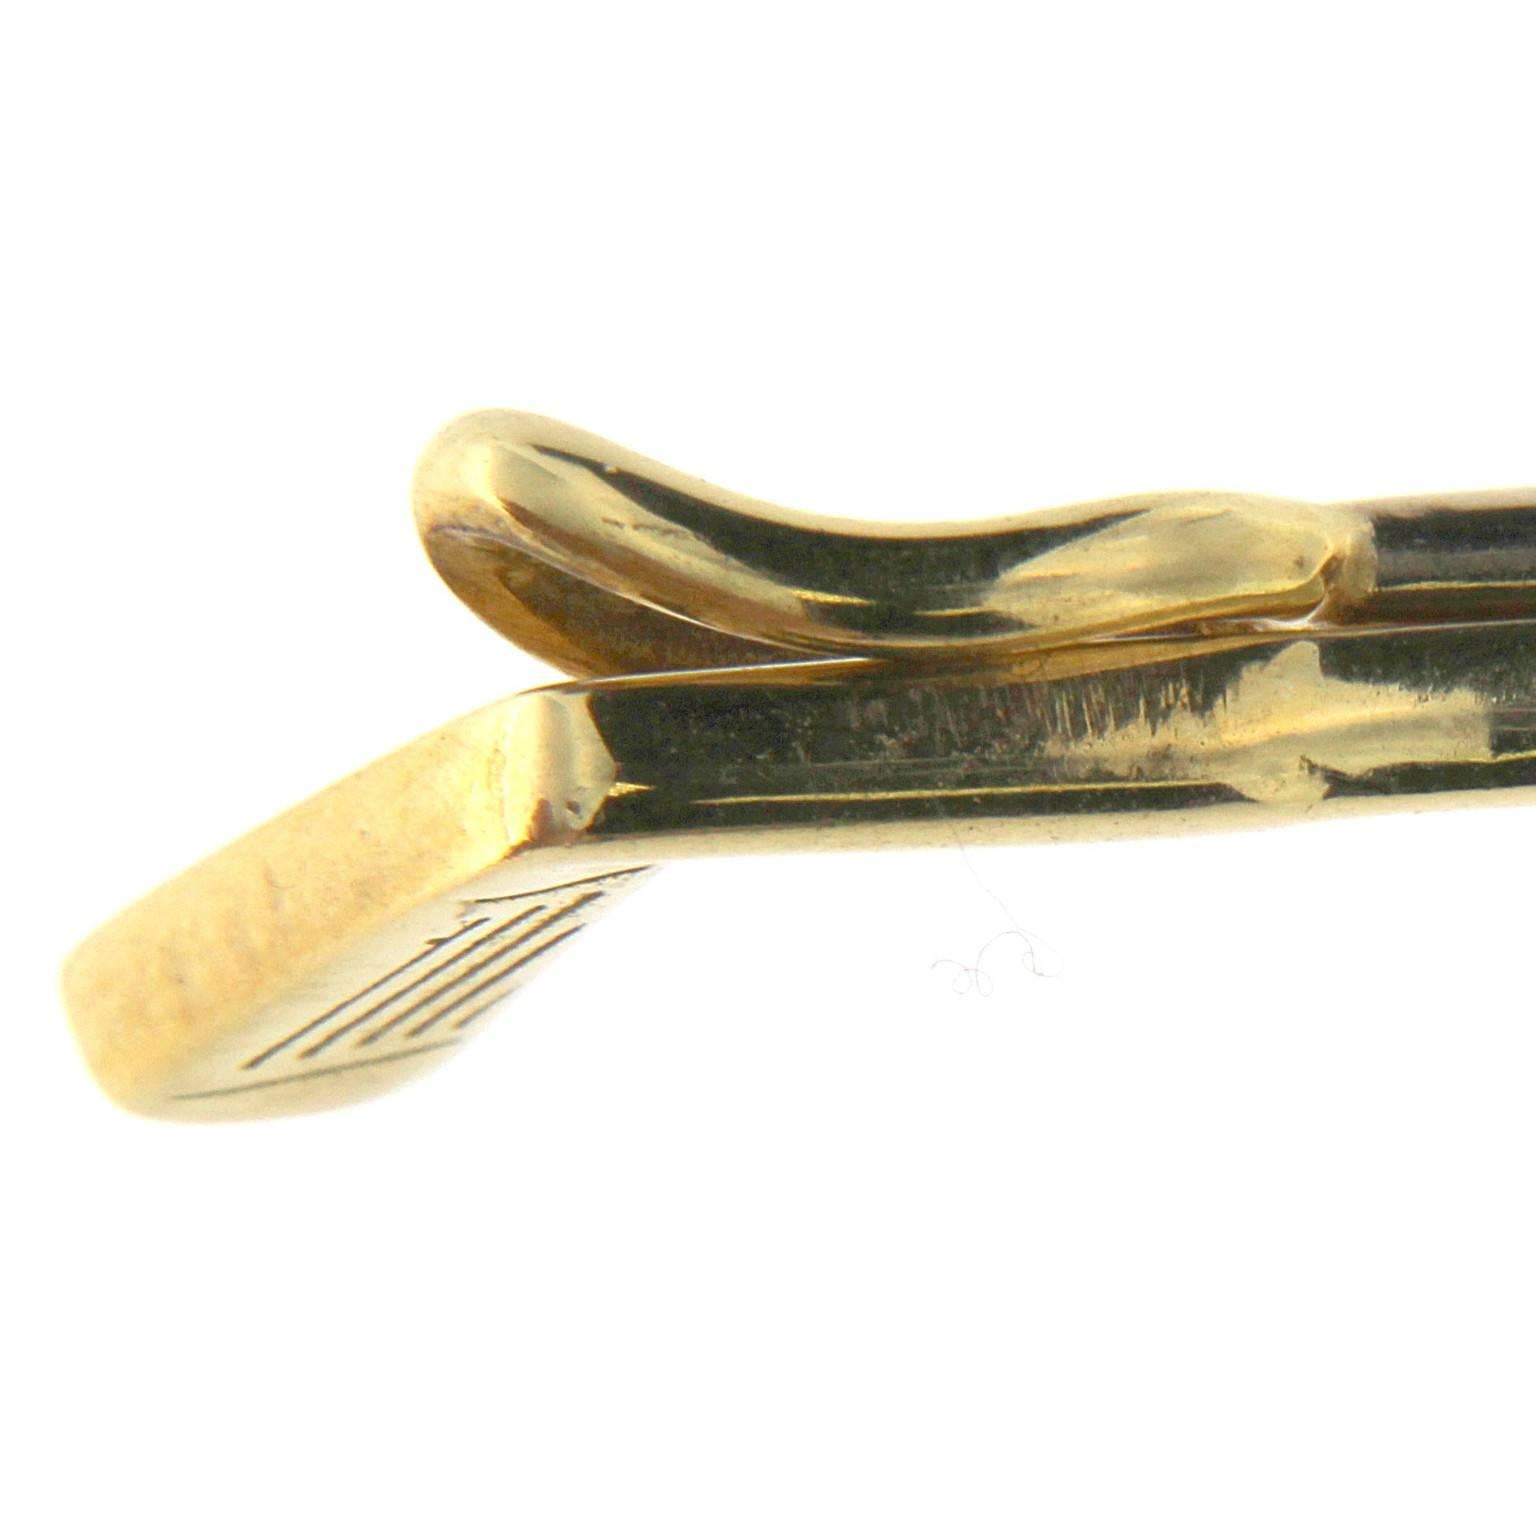 18kt gold classic and stylish golf club tie clip
Total gold weight: gr 6.80
Stamp: 10 MI, 750